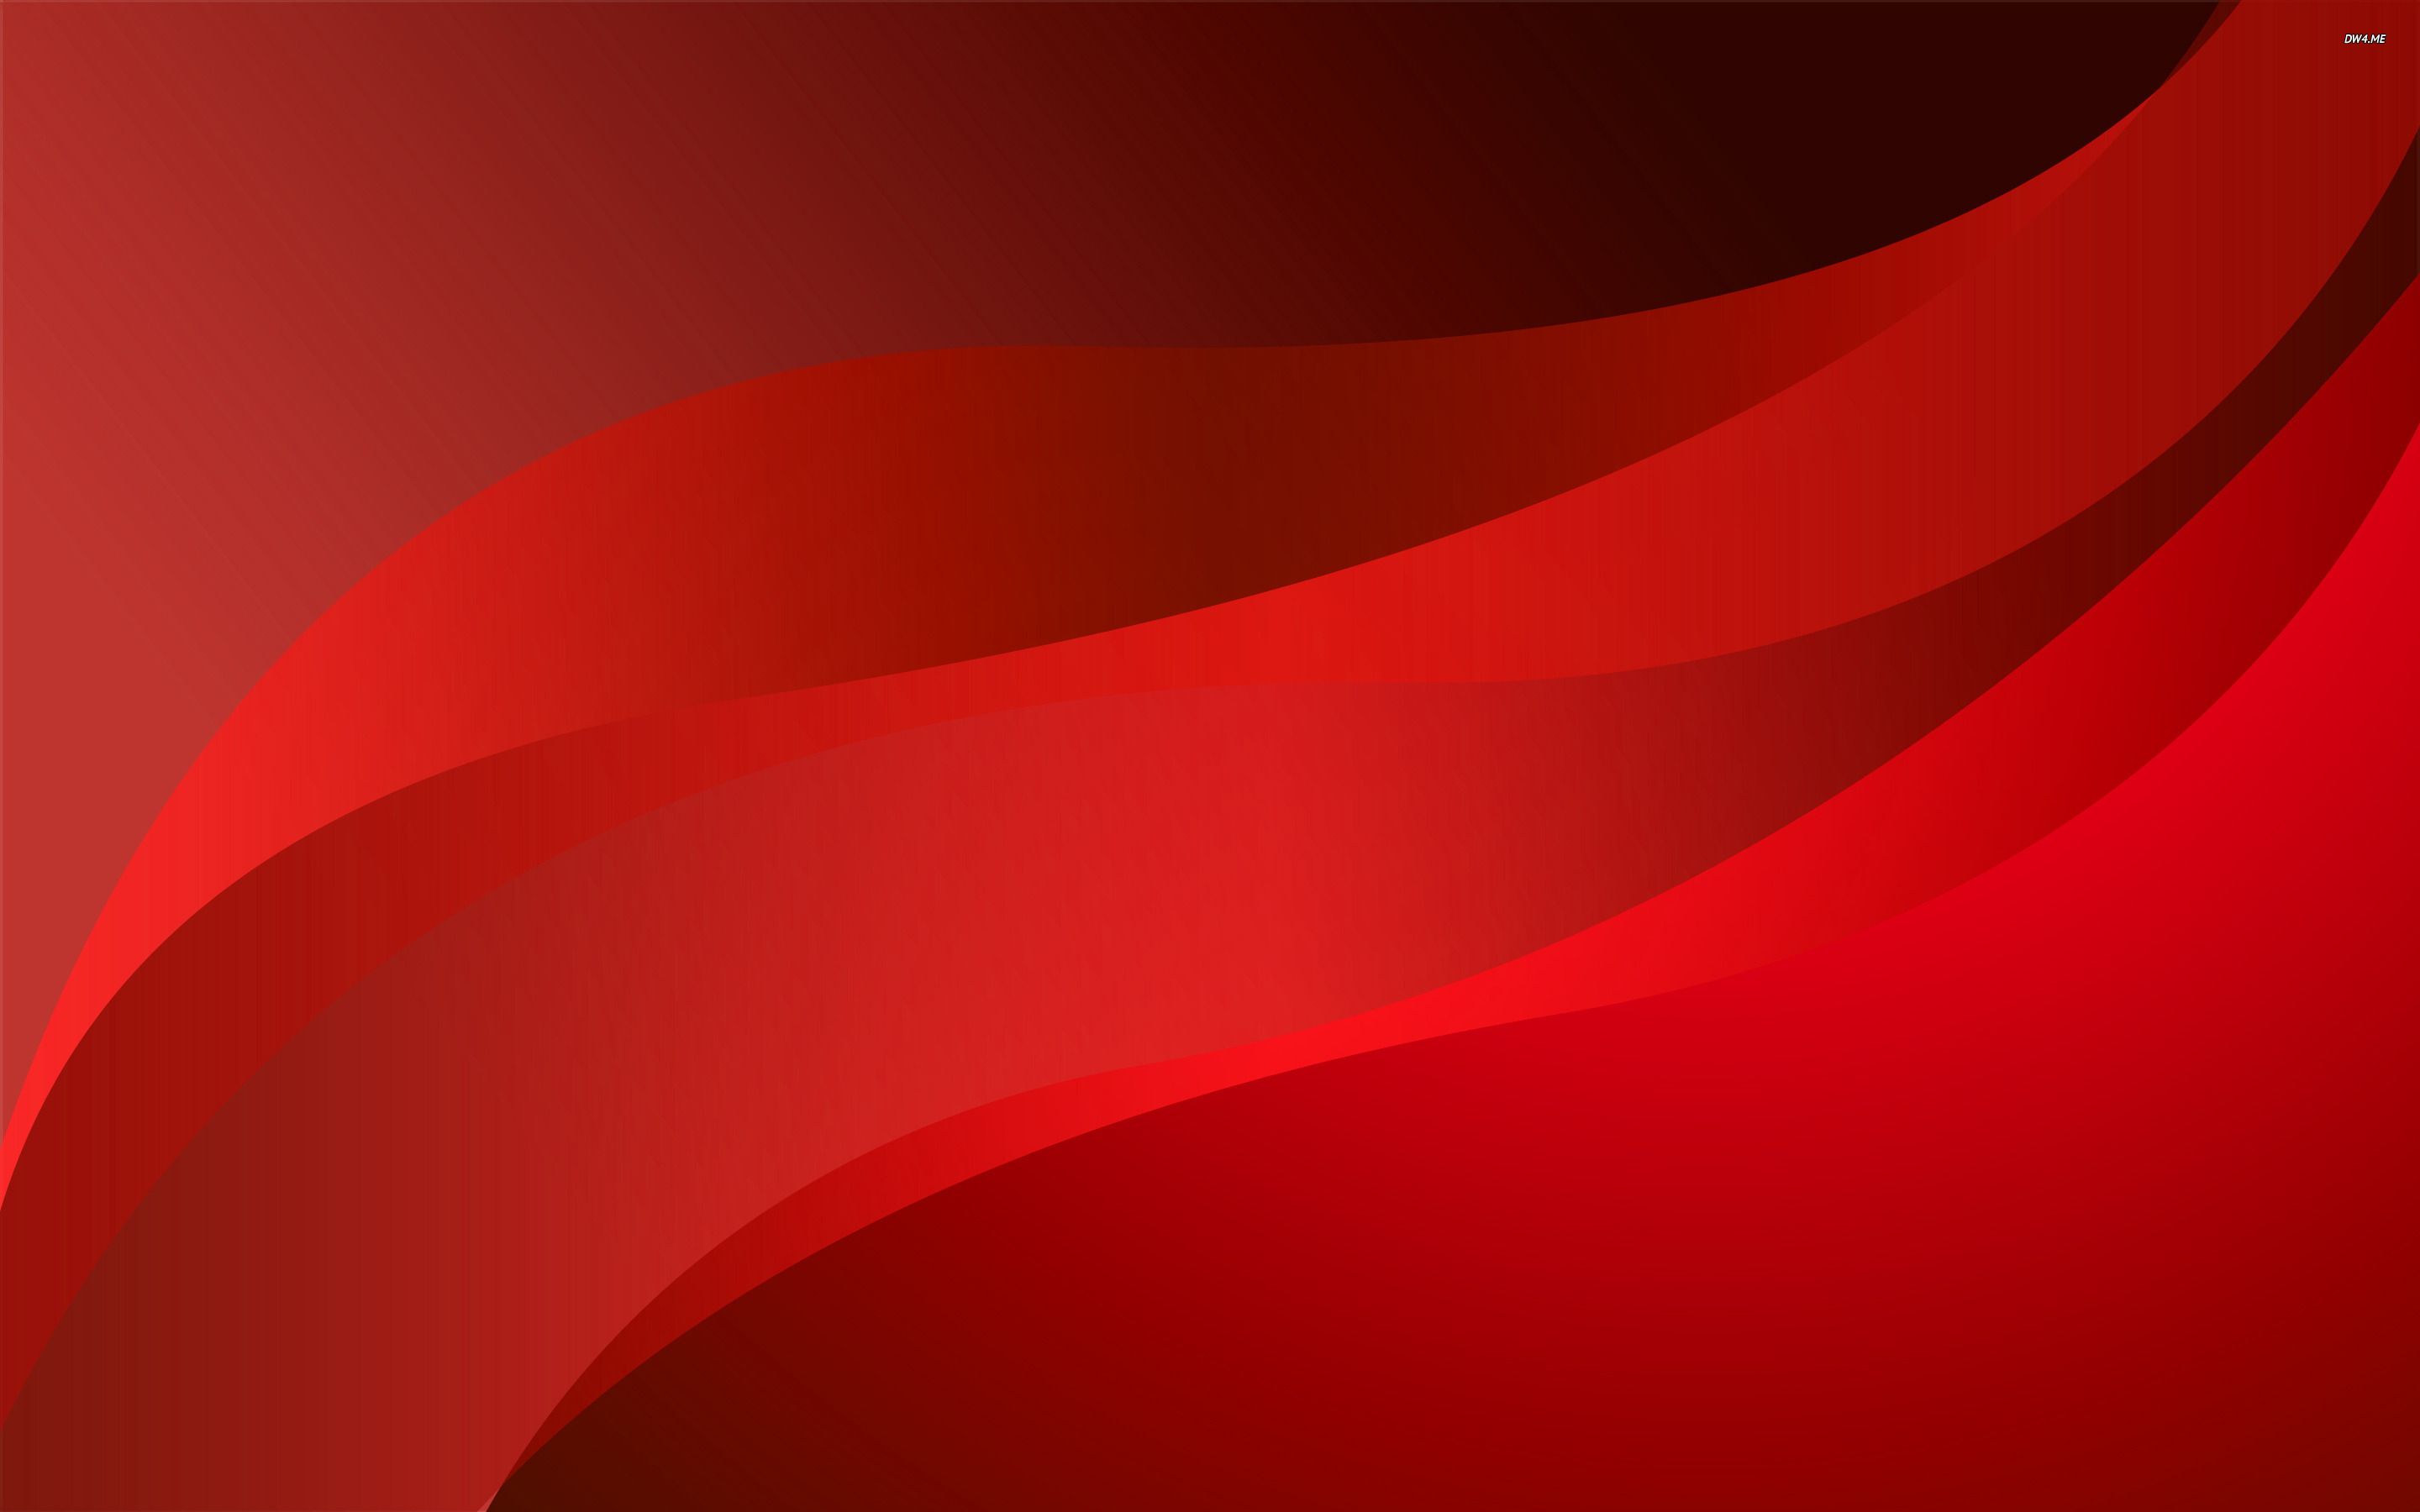 red curves abstract wallpaper HD Wallpaper Backgrounds Tumblr 2880x1800